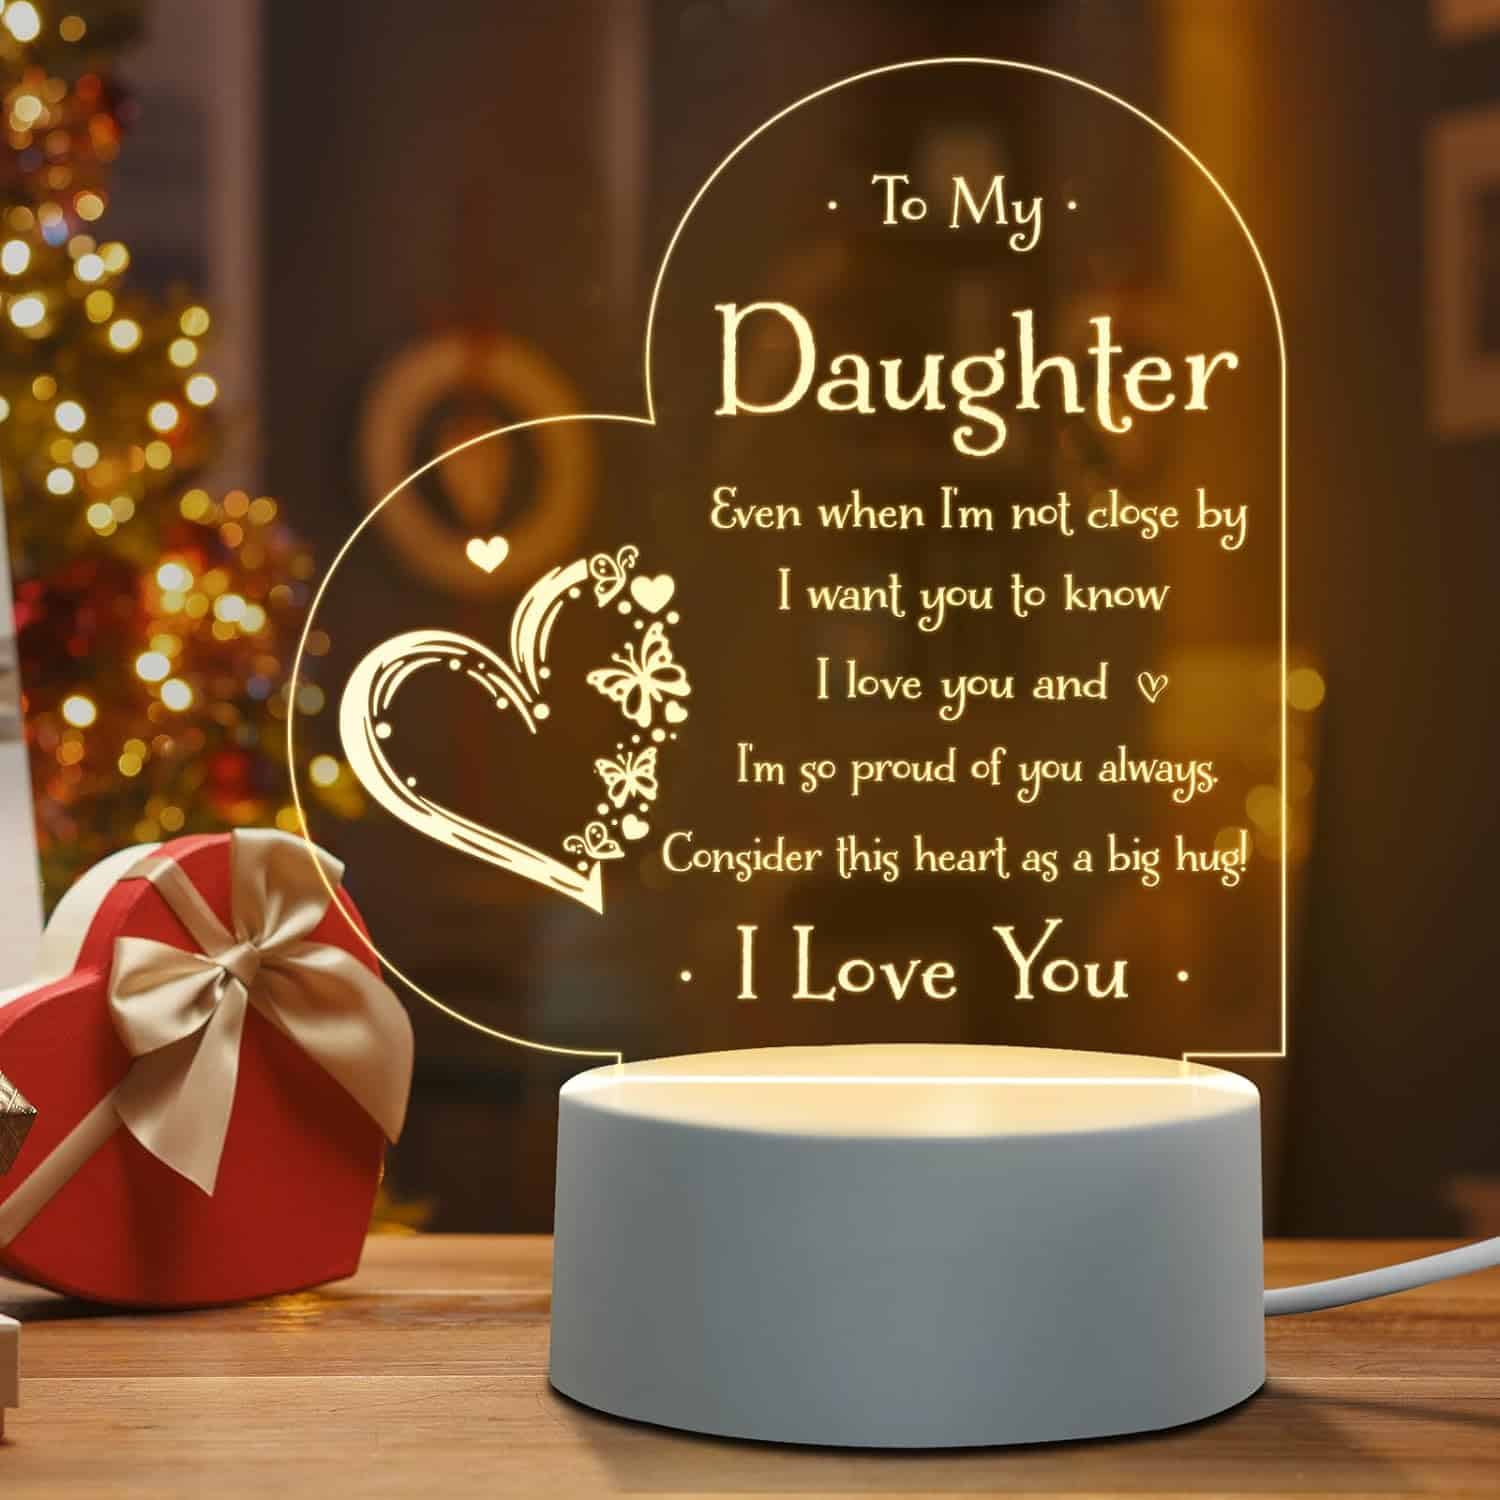 To My Daughter Engraved Night Light